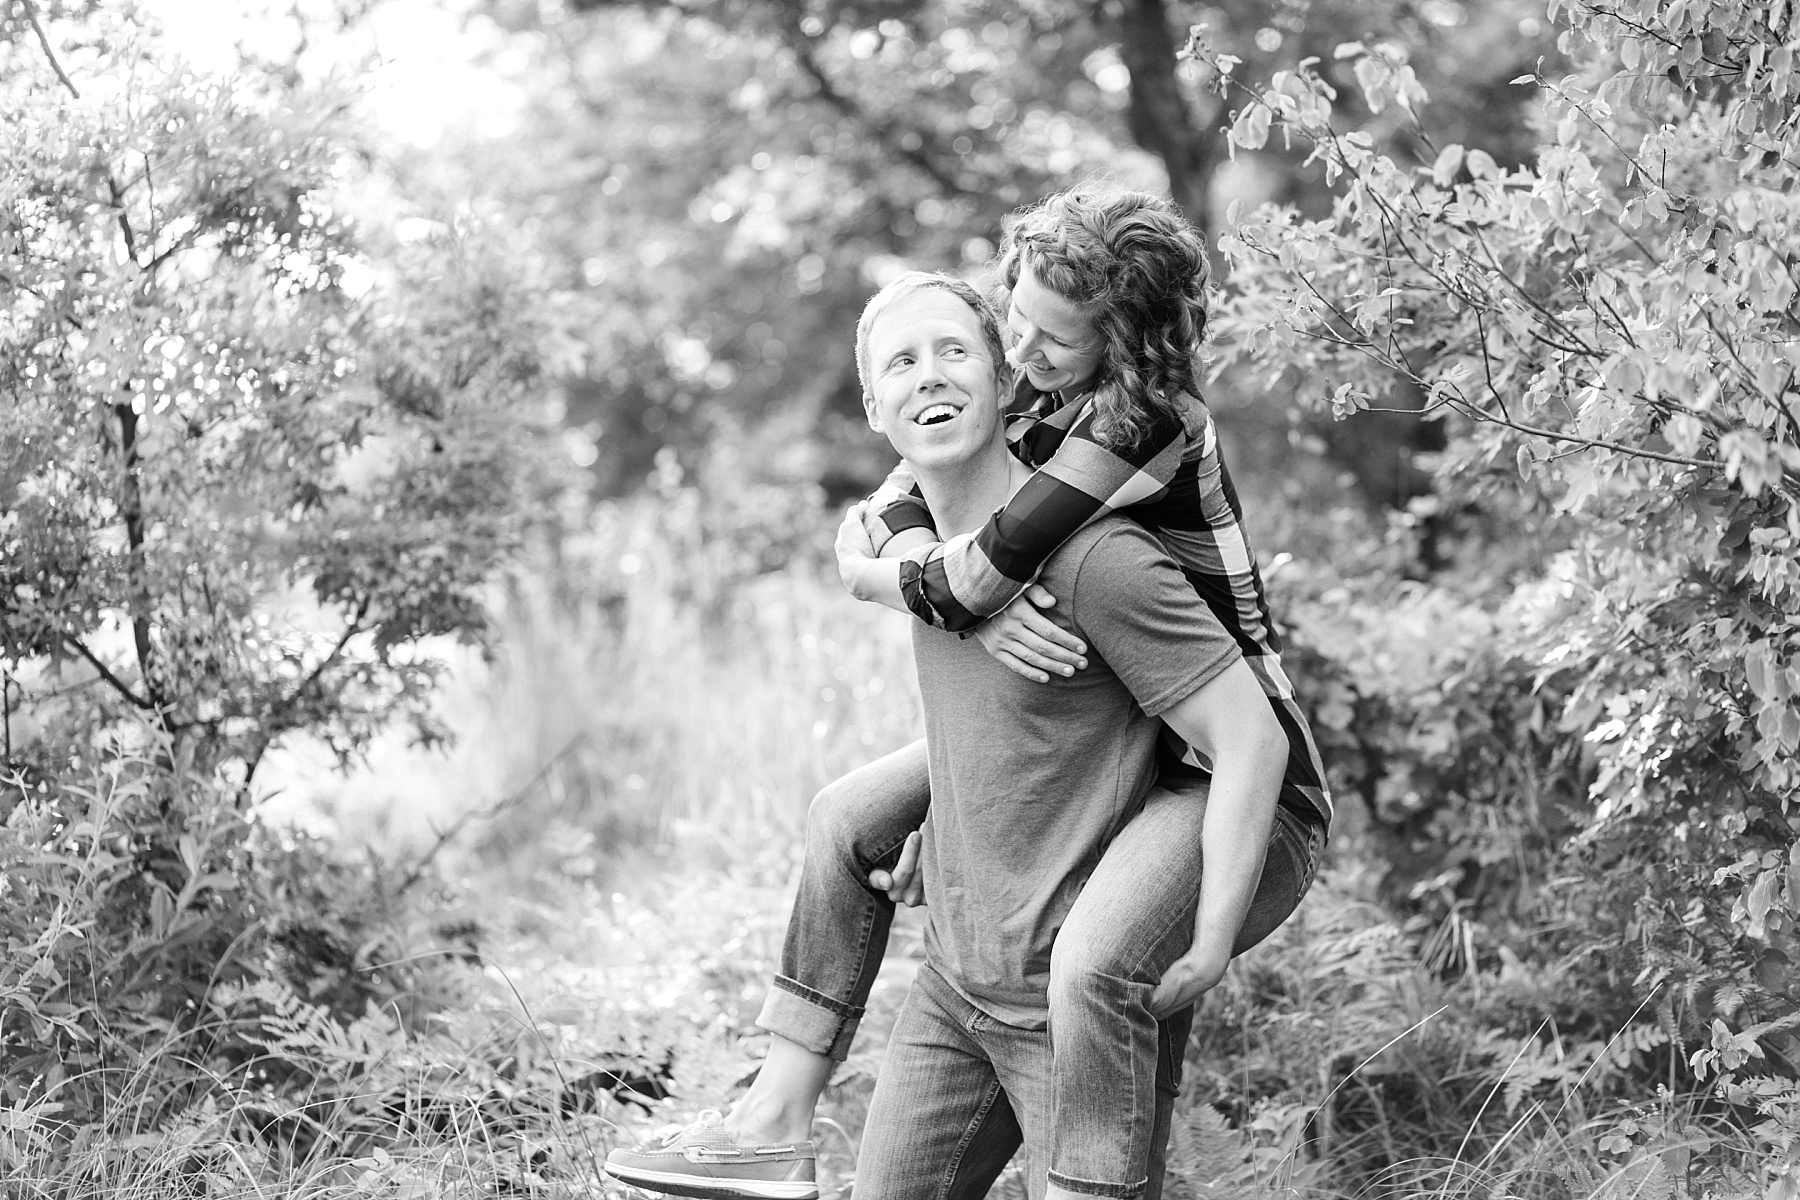 Just steps from the cabin where Susan spent so many summers, we photographed their engagement session on Lake Chicog.